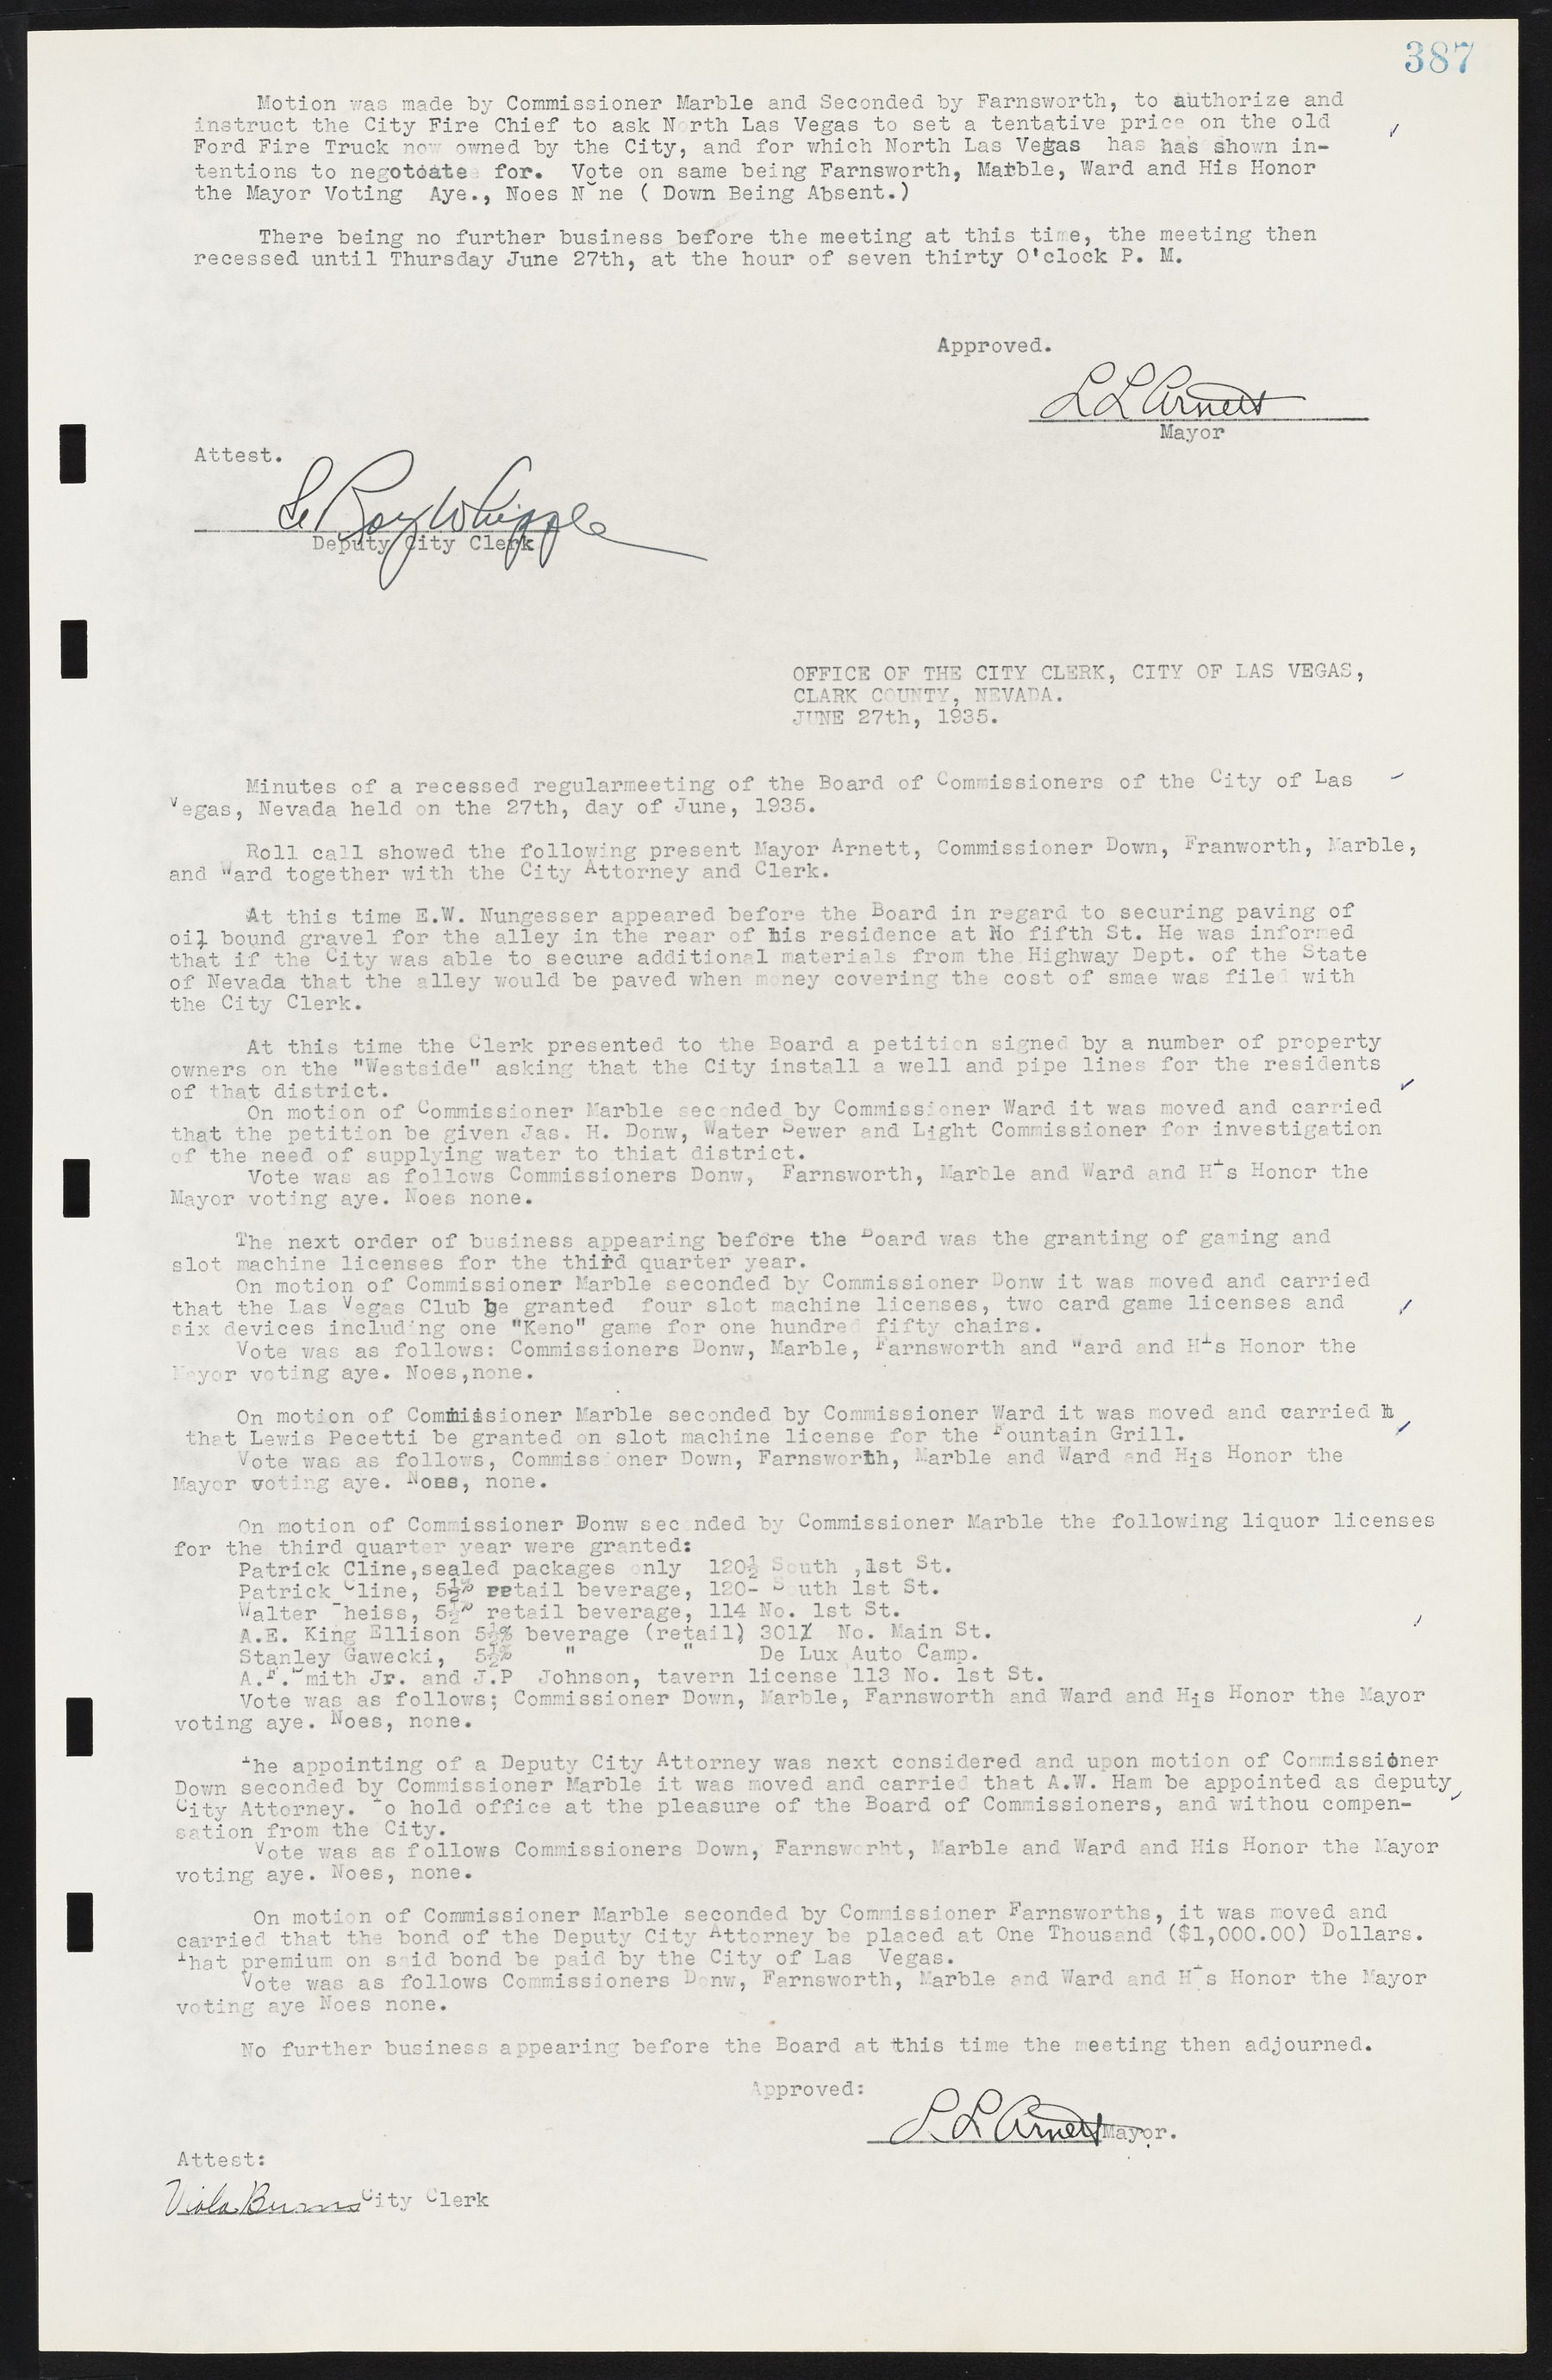 Las Vegas City Commission Minutes, May 14, 1929 to February 11, 1937, lvc000003-394